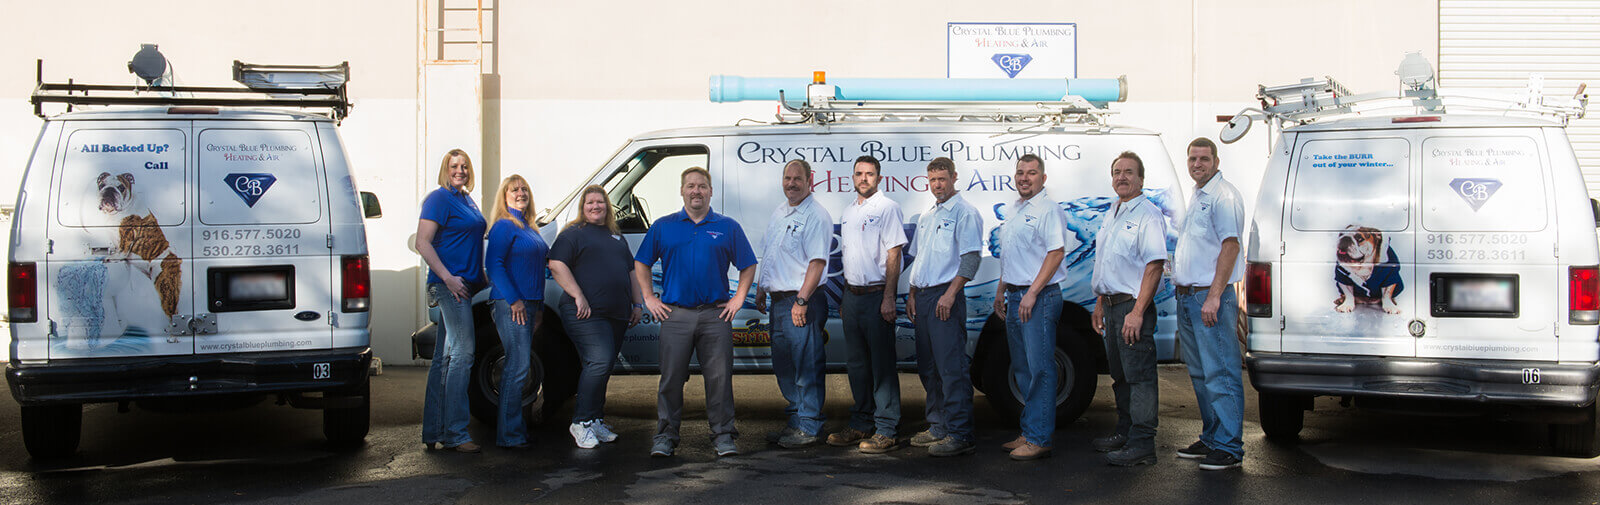 Heating and Cooling, Plumbing Services